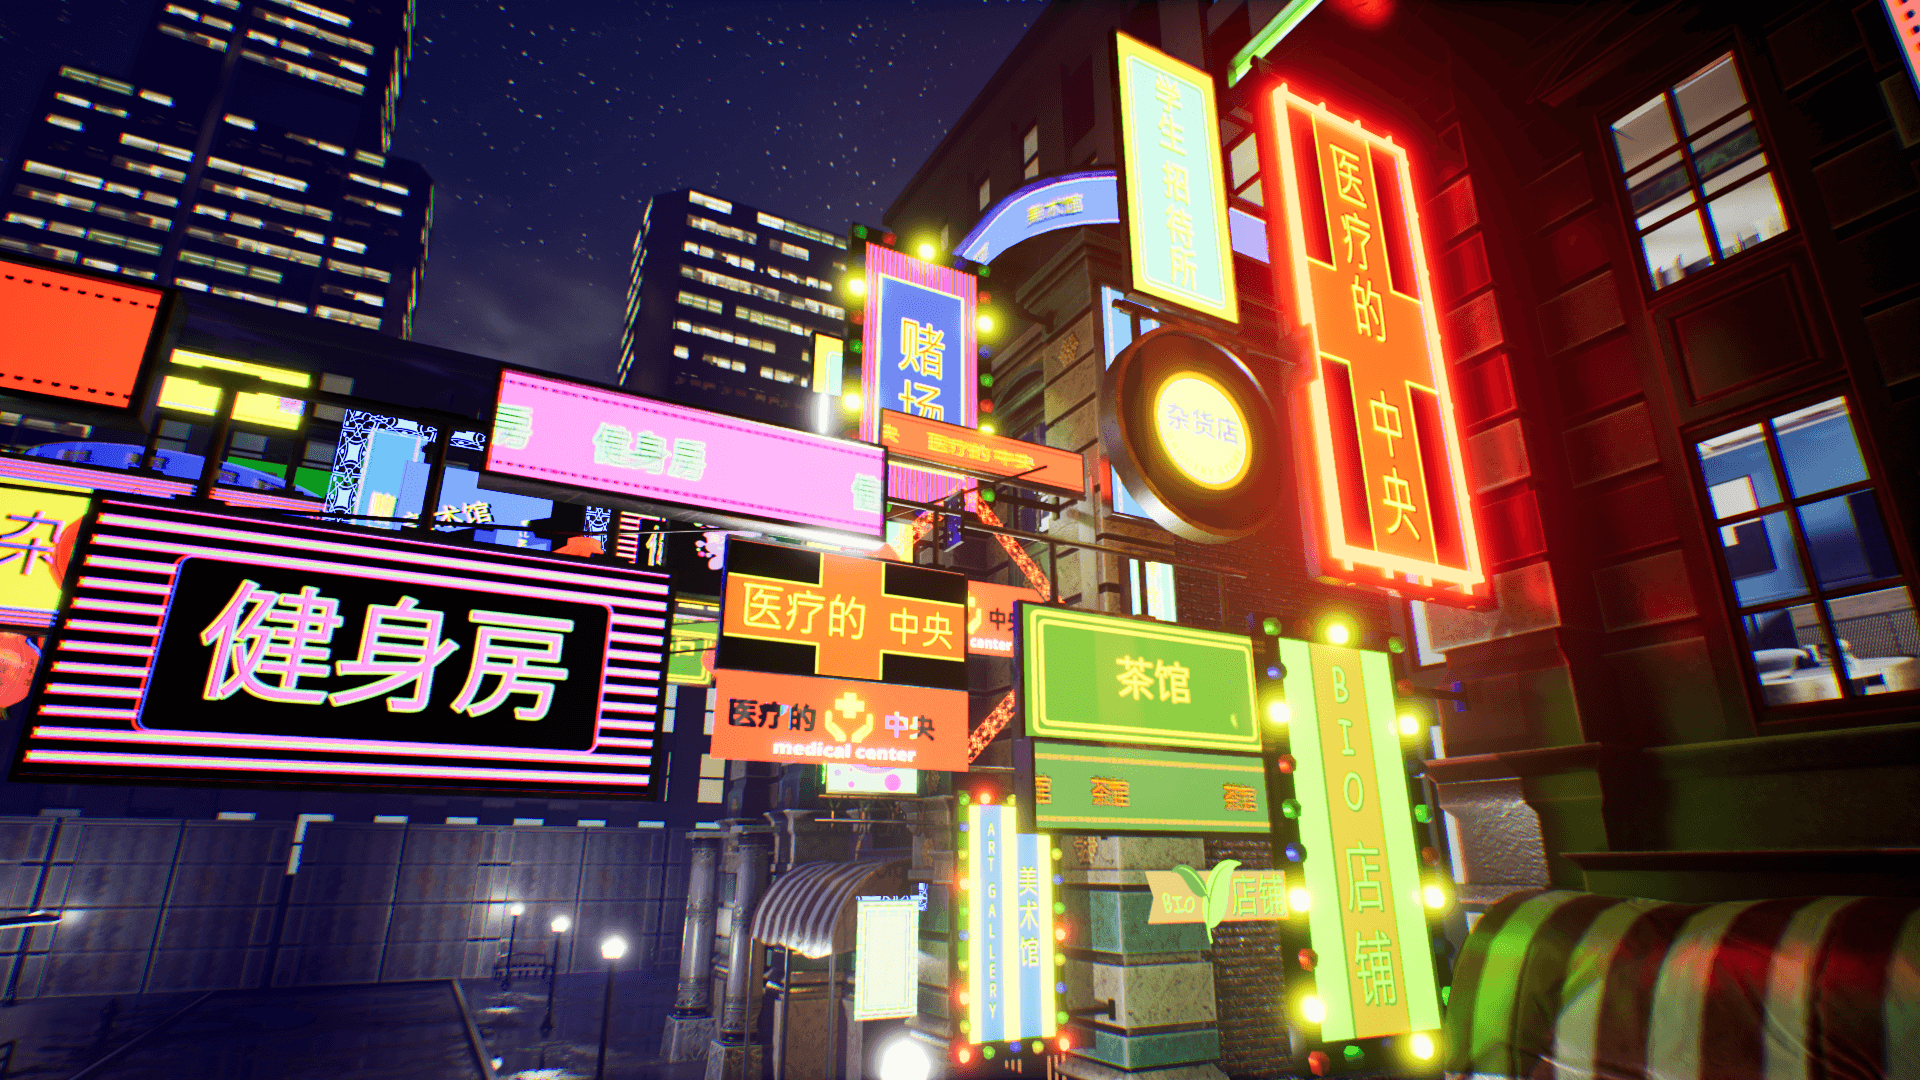 An image showing Chinese Neon Signs 2 asset pack, created with Unreal Engine